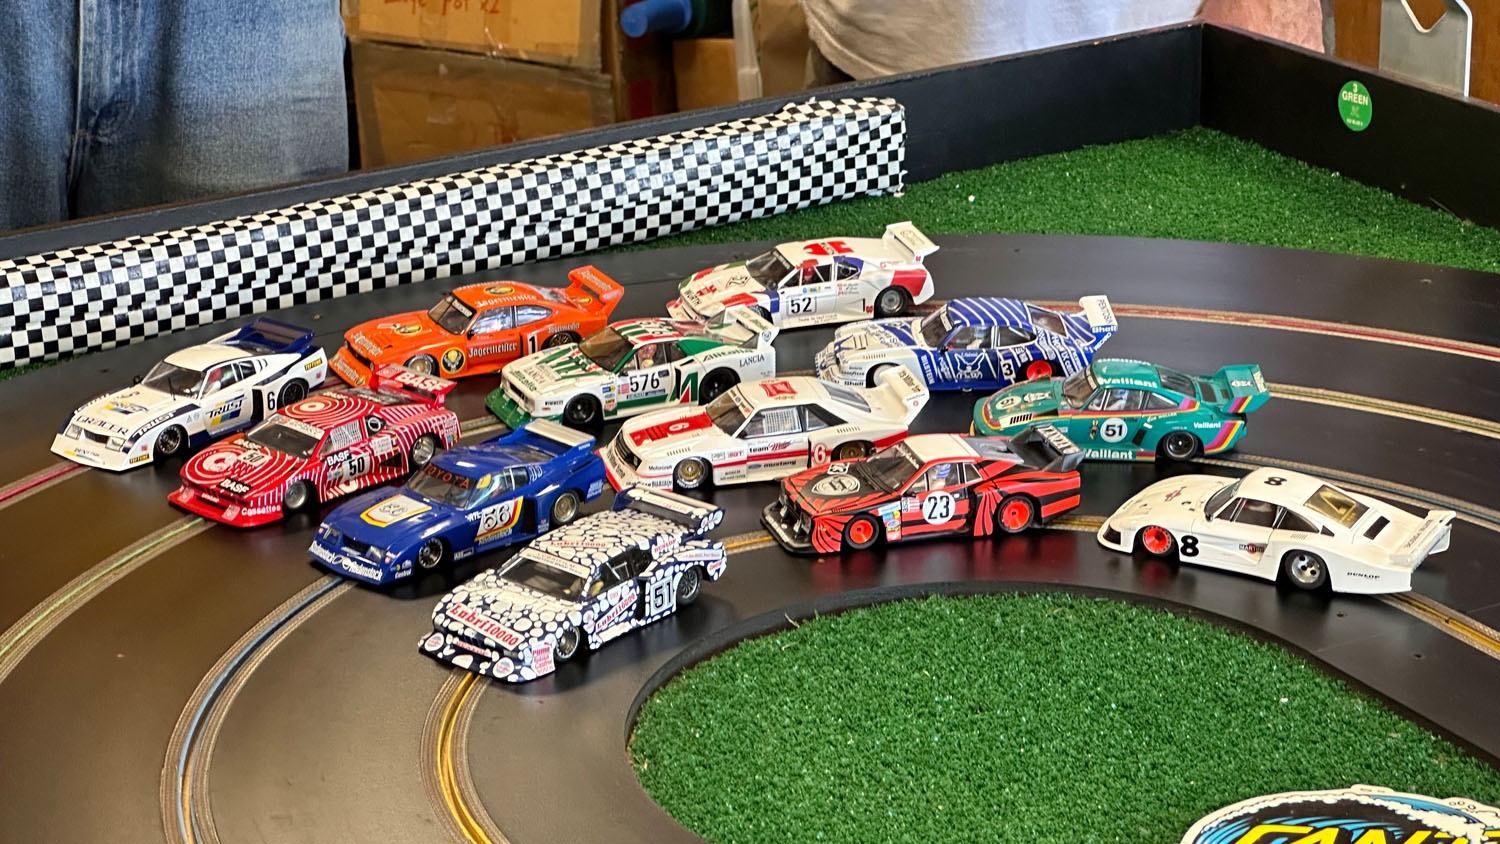 A grid of Racer Sideways Group 5 Slot Cars in San Jose, CA